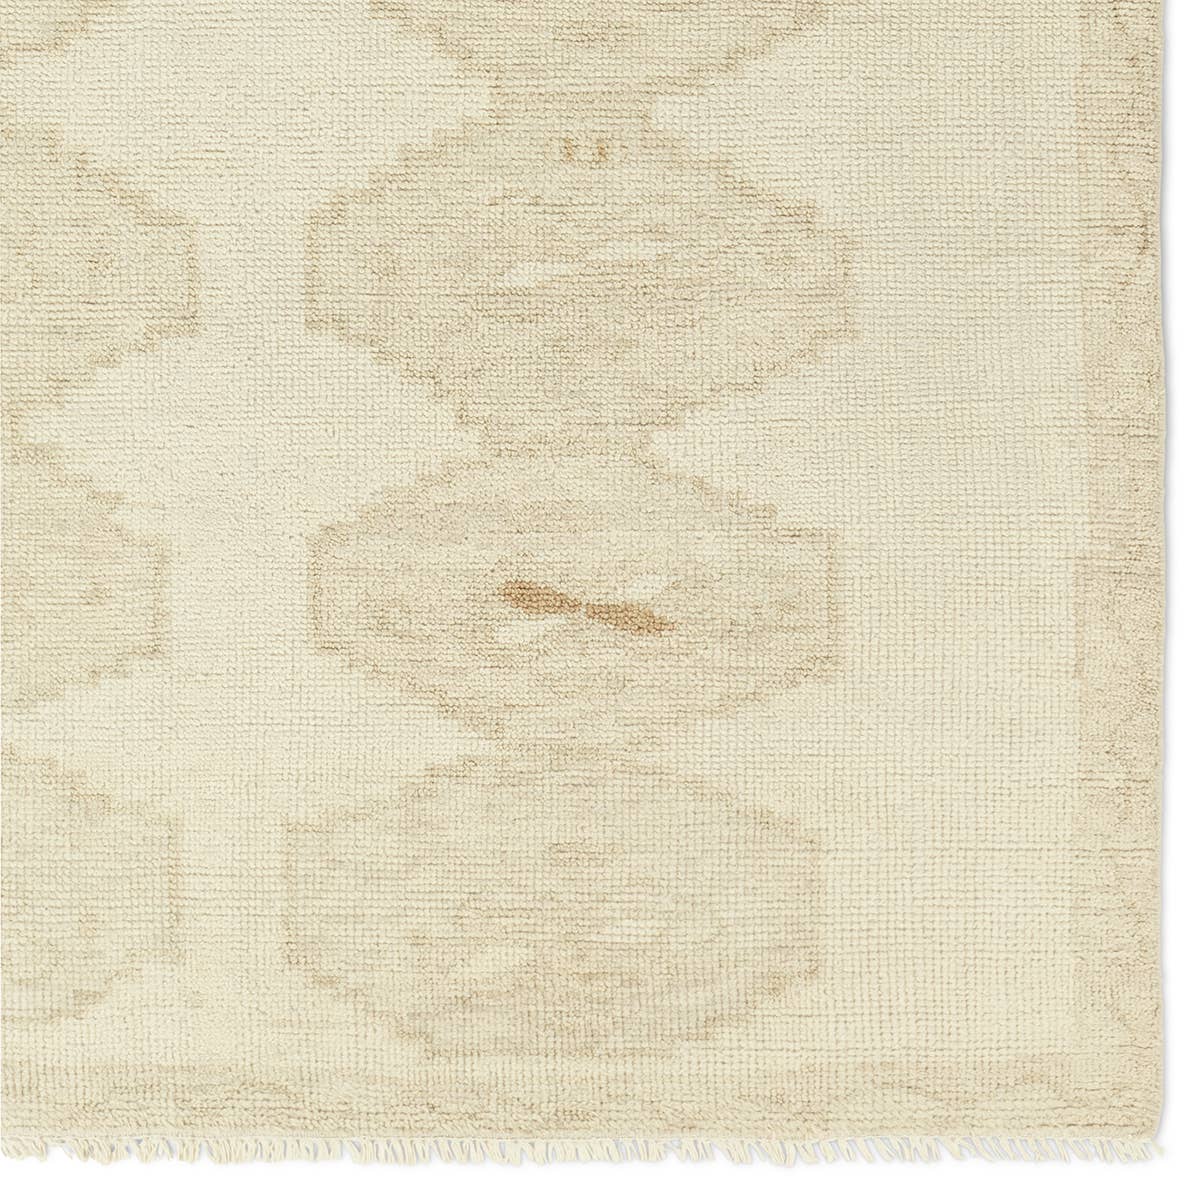 The hand-knotted Sevak Ismail emulates vintage rugs with traditional Turkish patterns, distressing, and a neutral color palette for versatility. The Ismail design features mini-medallions and a subtle border in tones of tan, cream, and brown. Amethyst Home provides interior design, new home construction design consulting, vintage area rugs, and lighting in the Laguna Beach metro area.